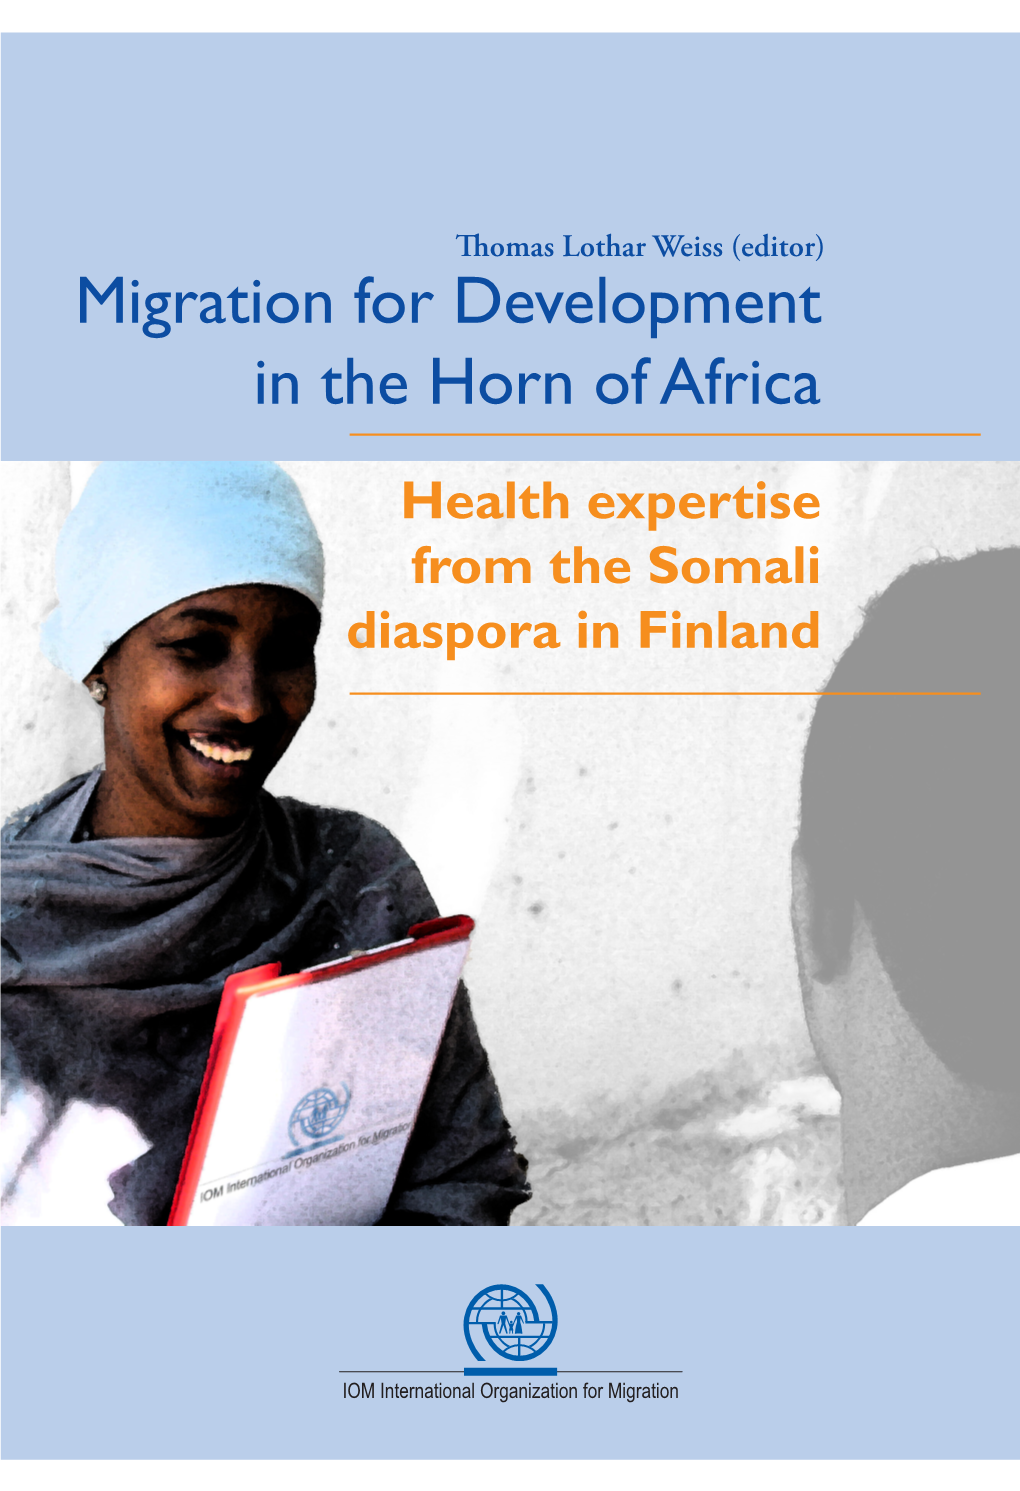 Migration for Development in the Horn of Africa